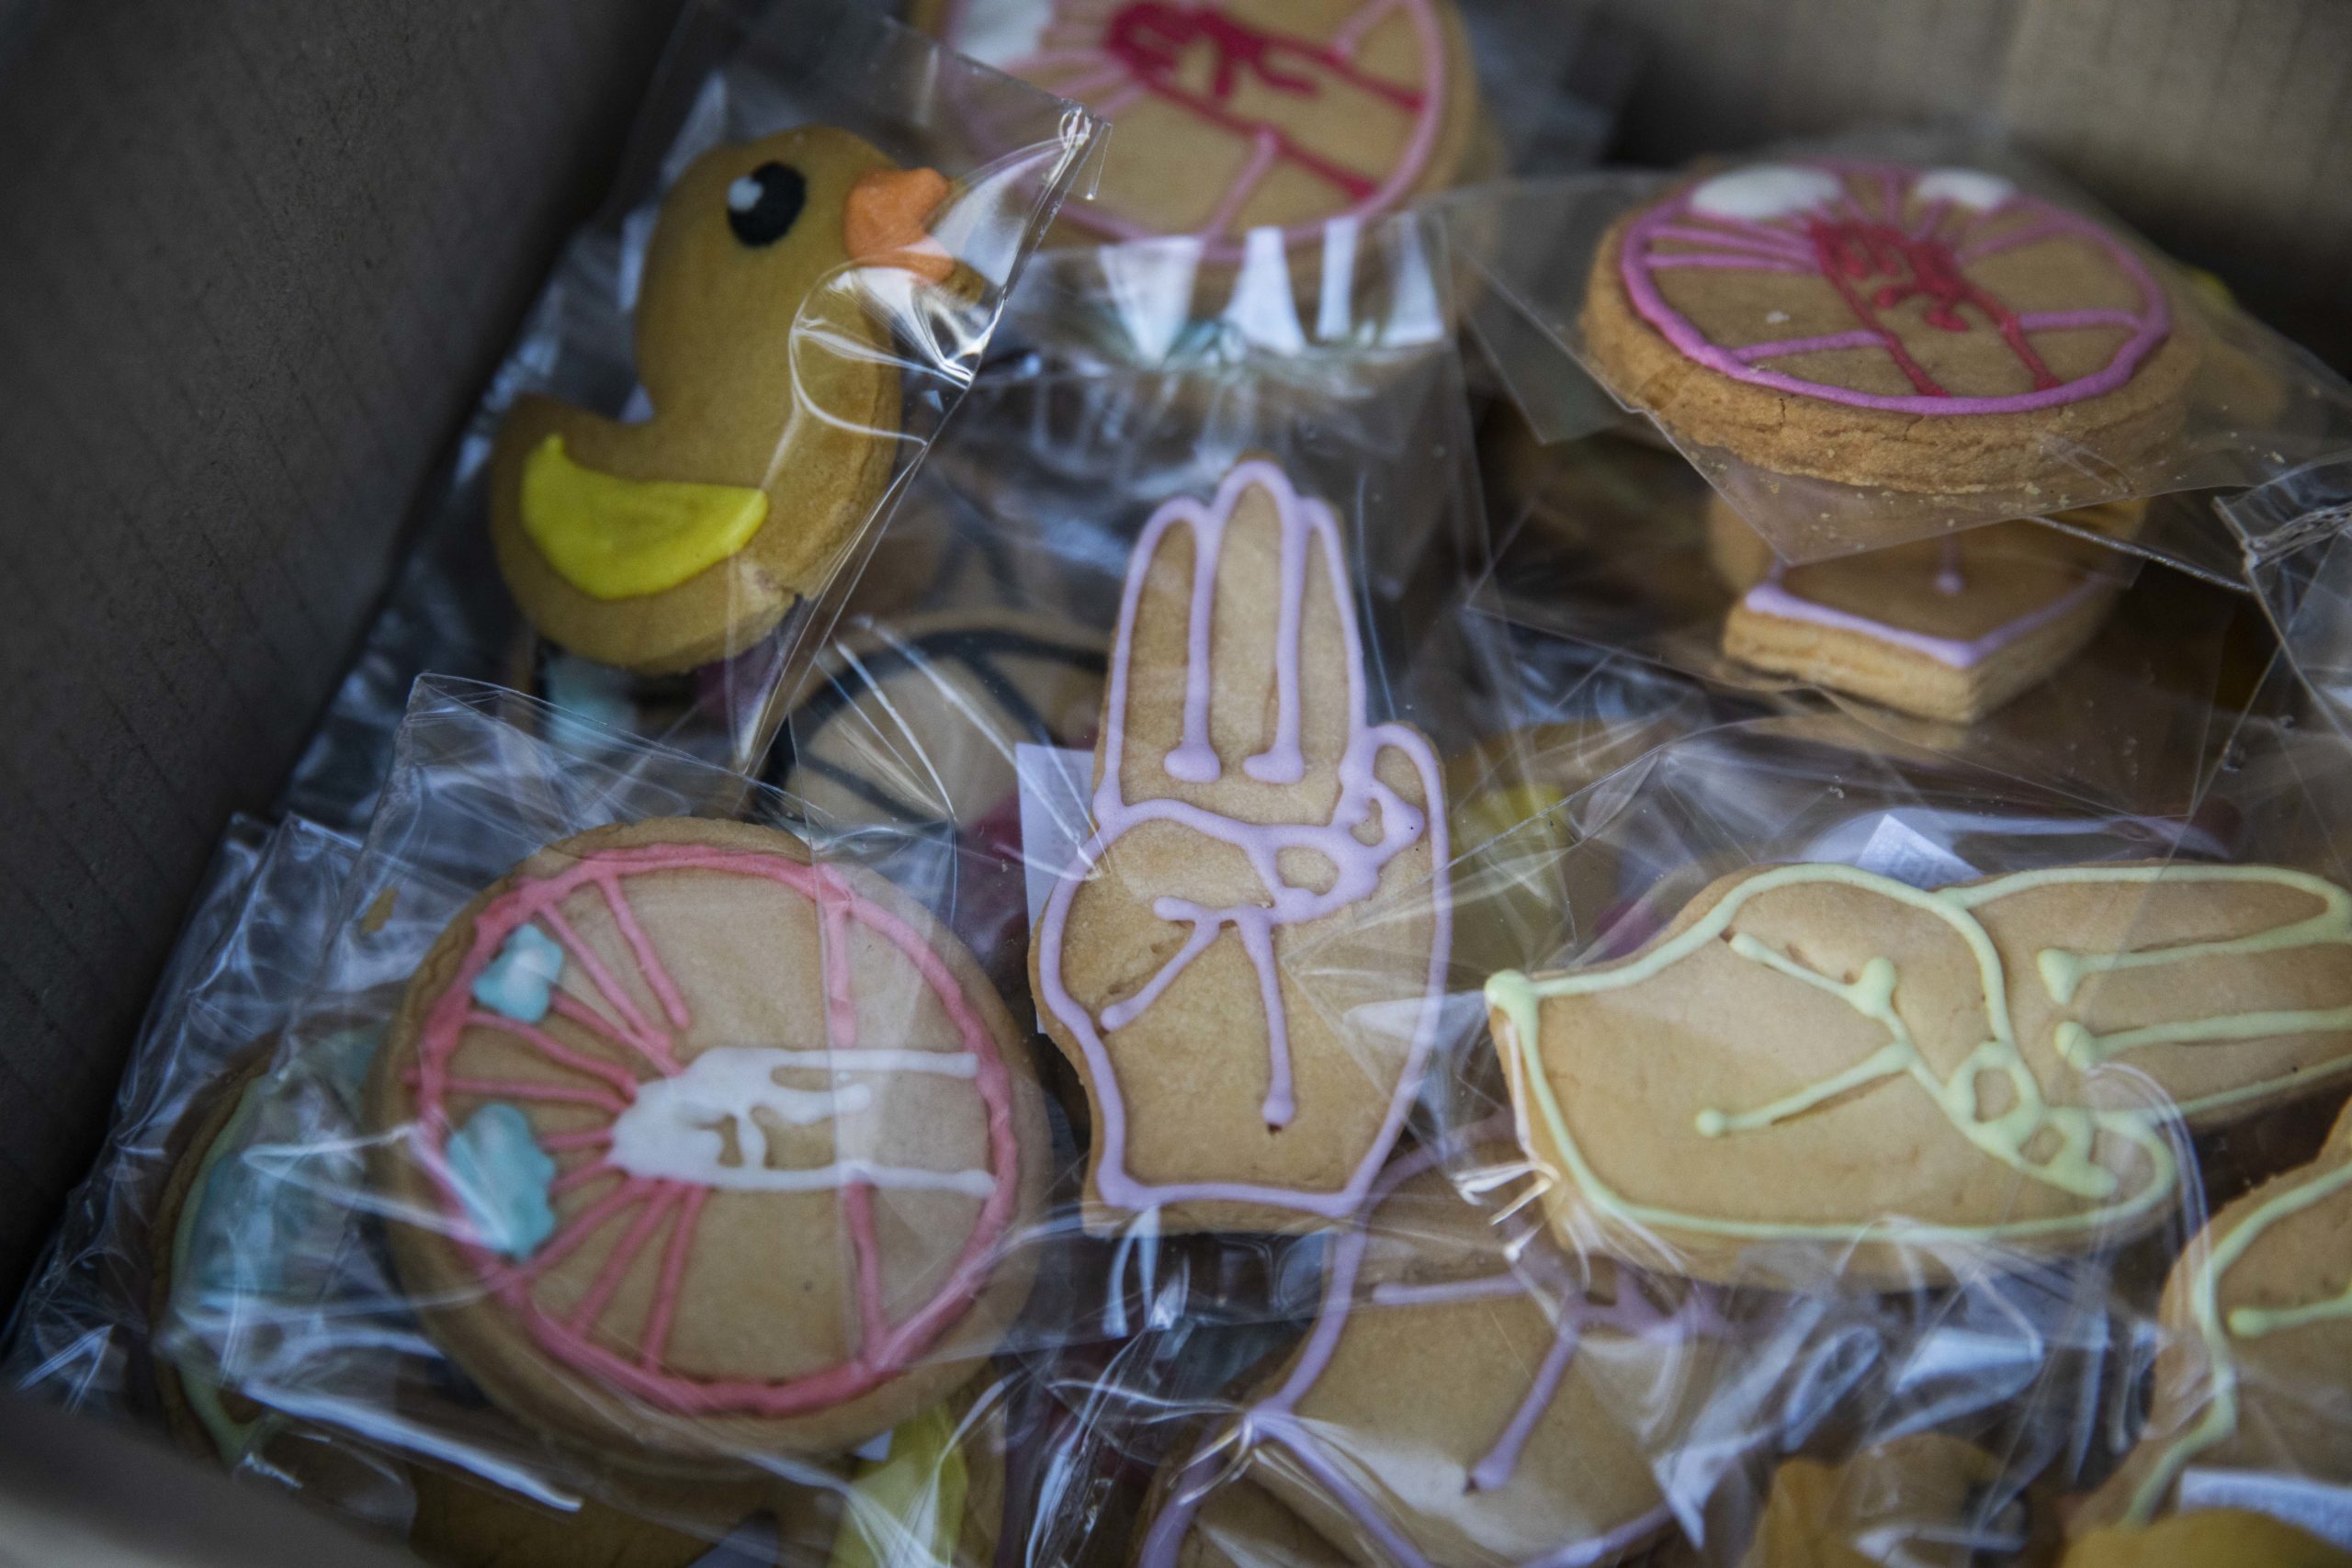  Thai pro-democracy protesters sell cookies featuring a three-finger salute on December 10, 2020 in Bangkok, Thailand.  (Photo: Lauren DeCicca, Getty Images)